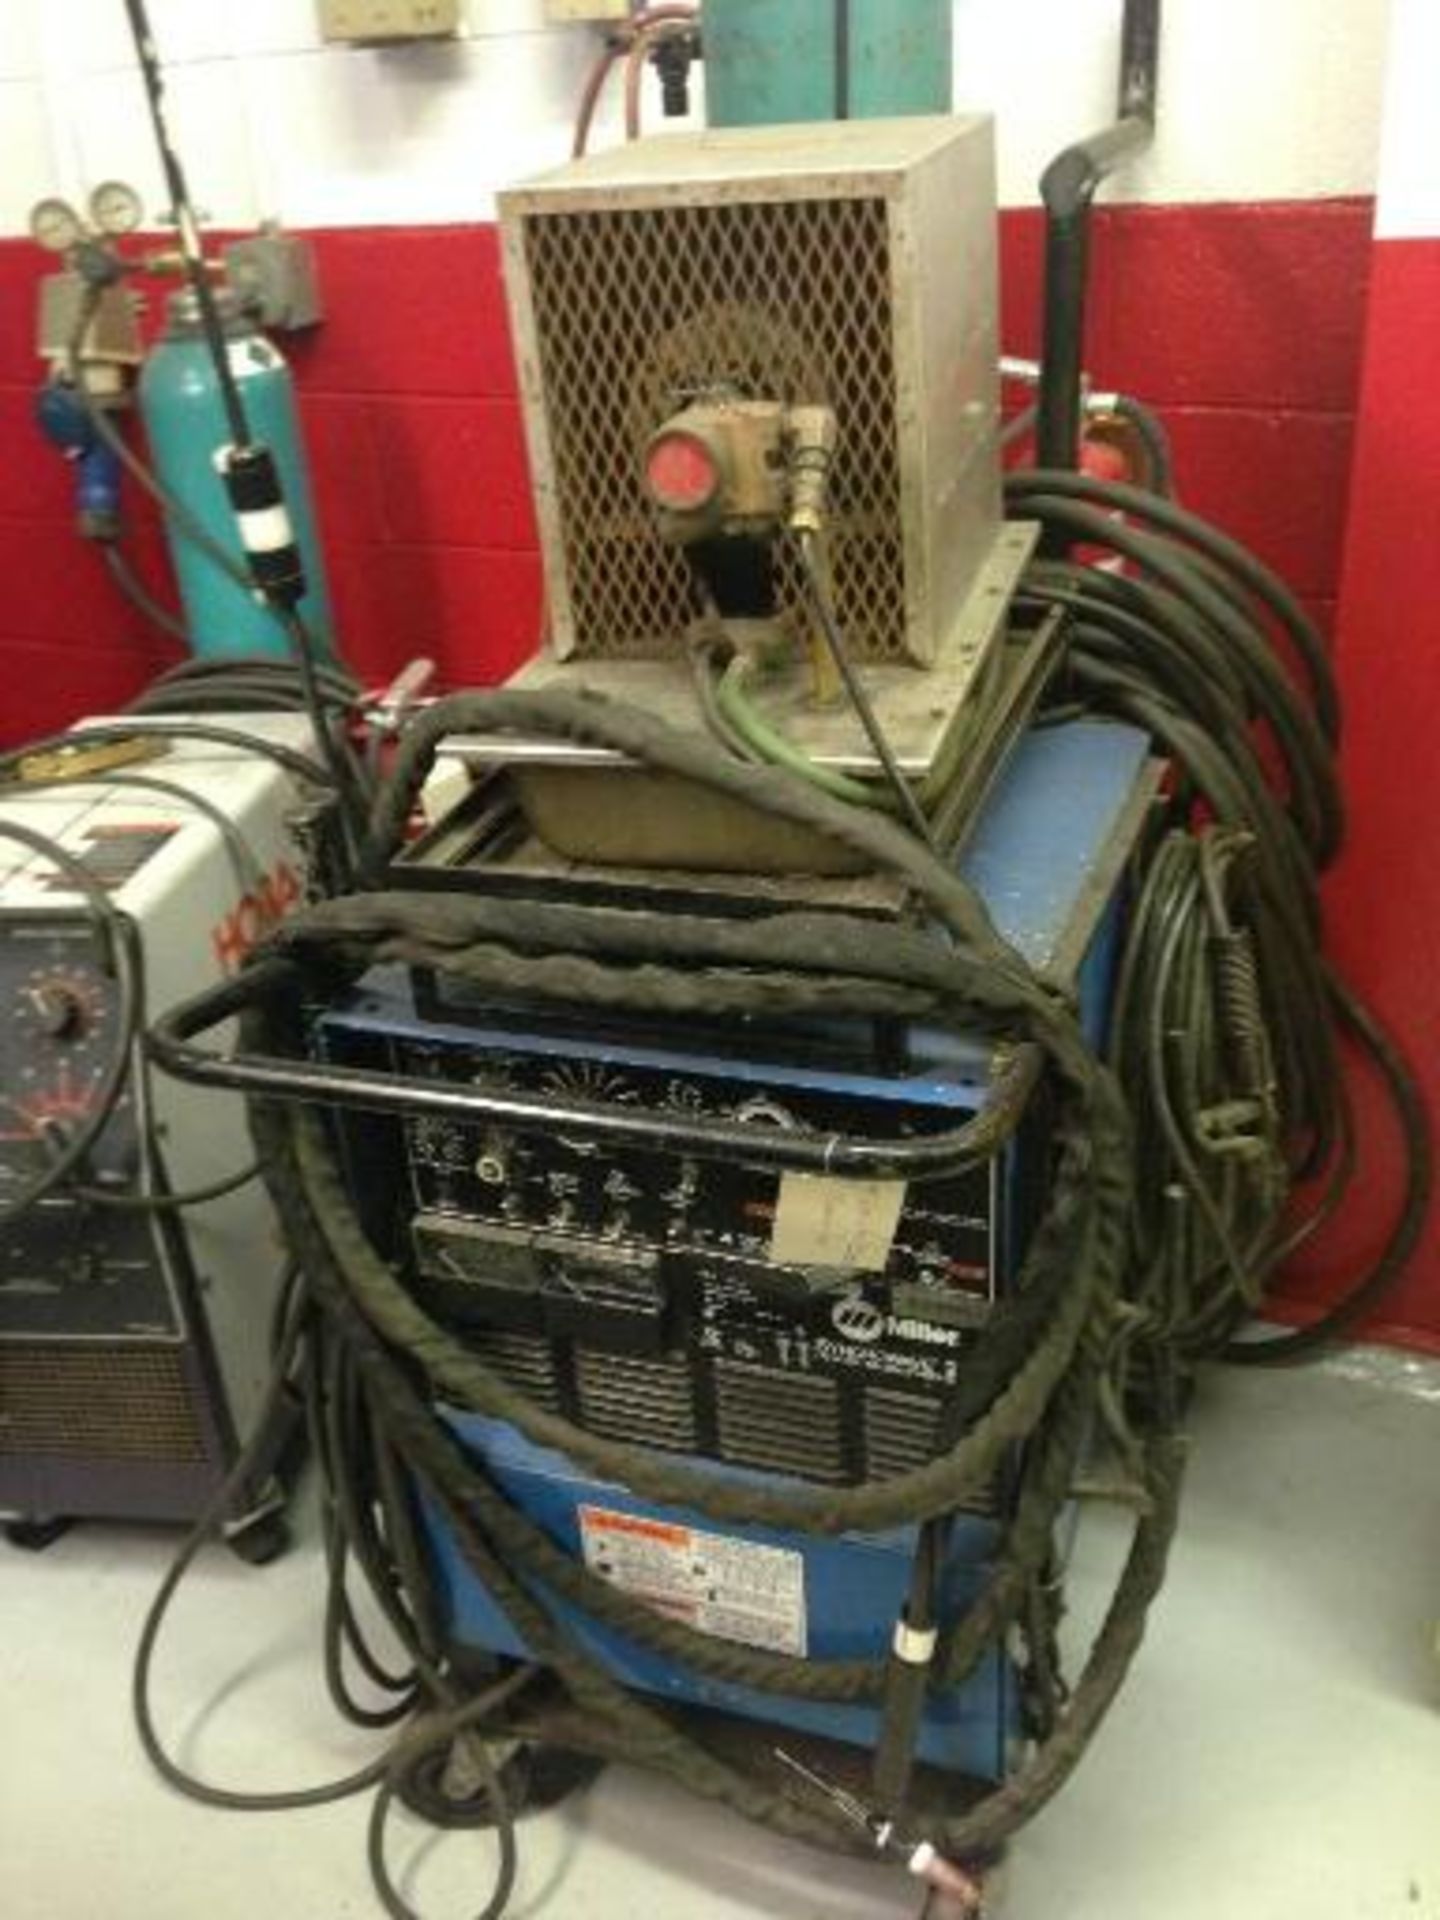 Miller syncrowave 250 welder. Located in Marion, Ohio Rigging Fee: $150